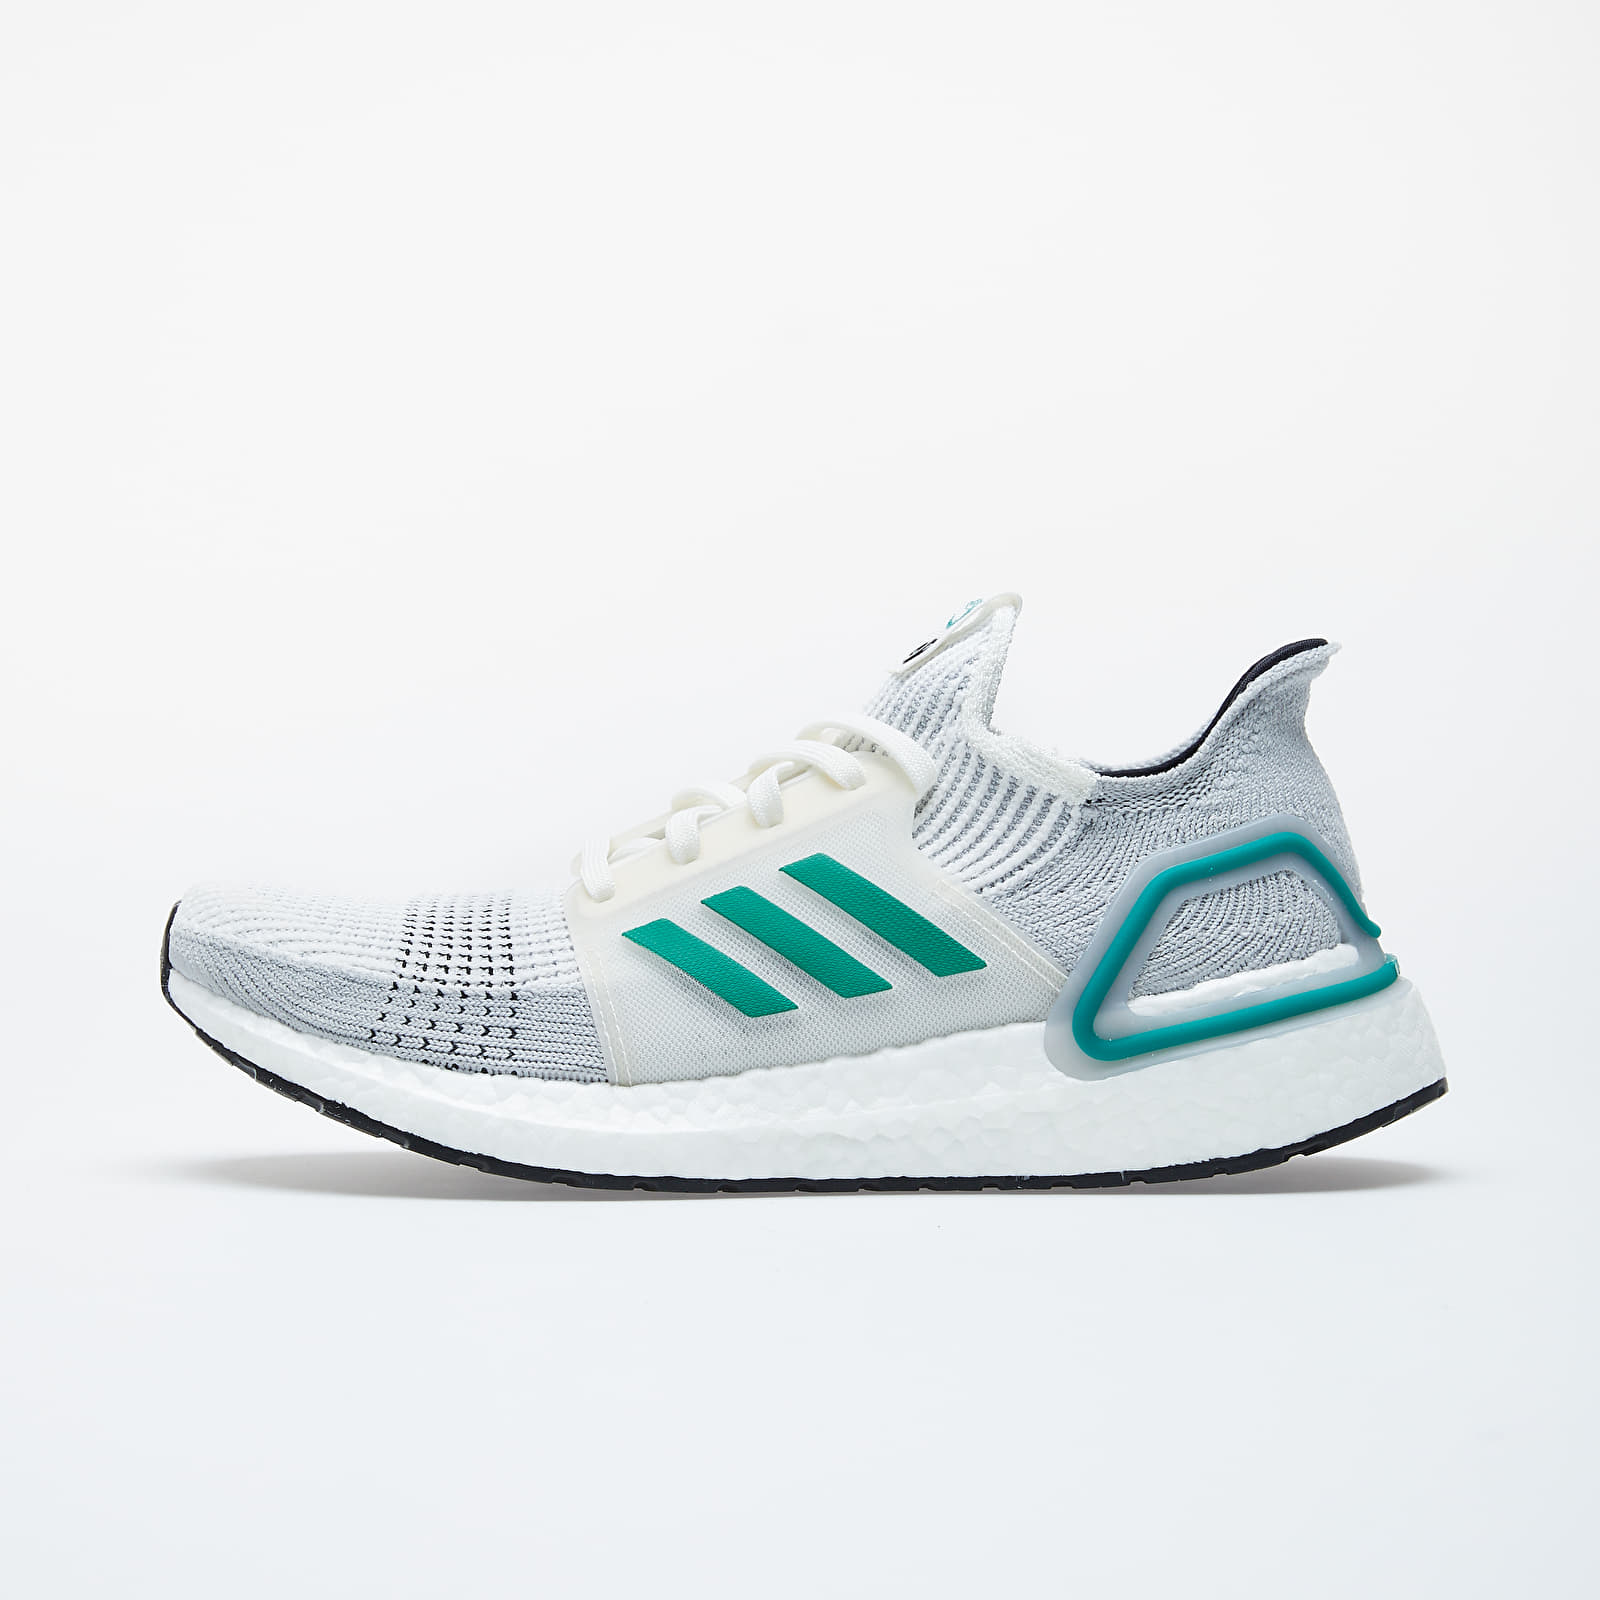 Pánske tenisky a topánky adidas Consortium UltraBOOST 19 Core White/ Sub Green/ Grey Two